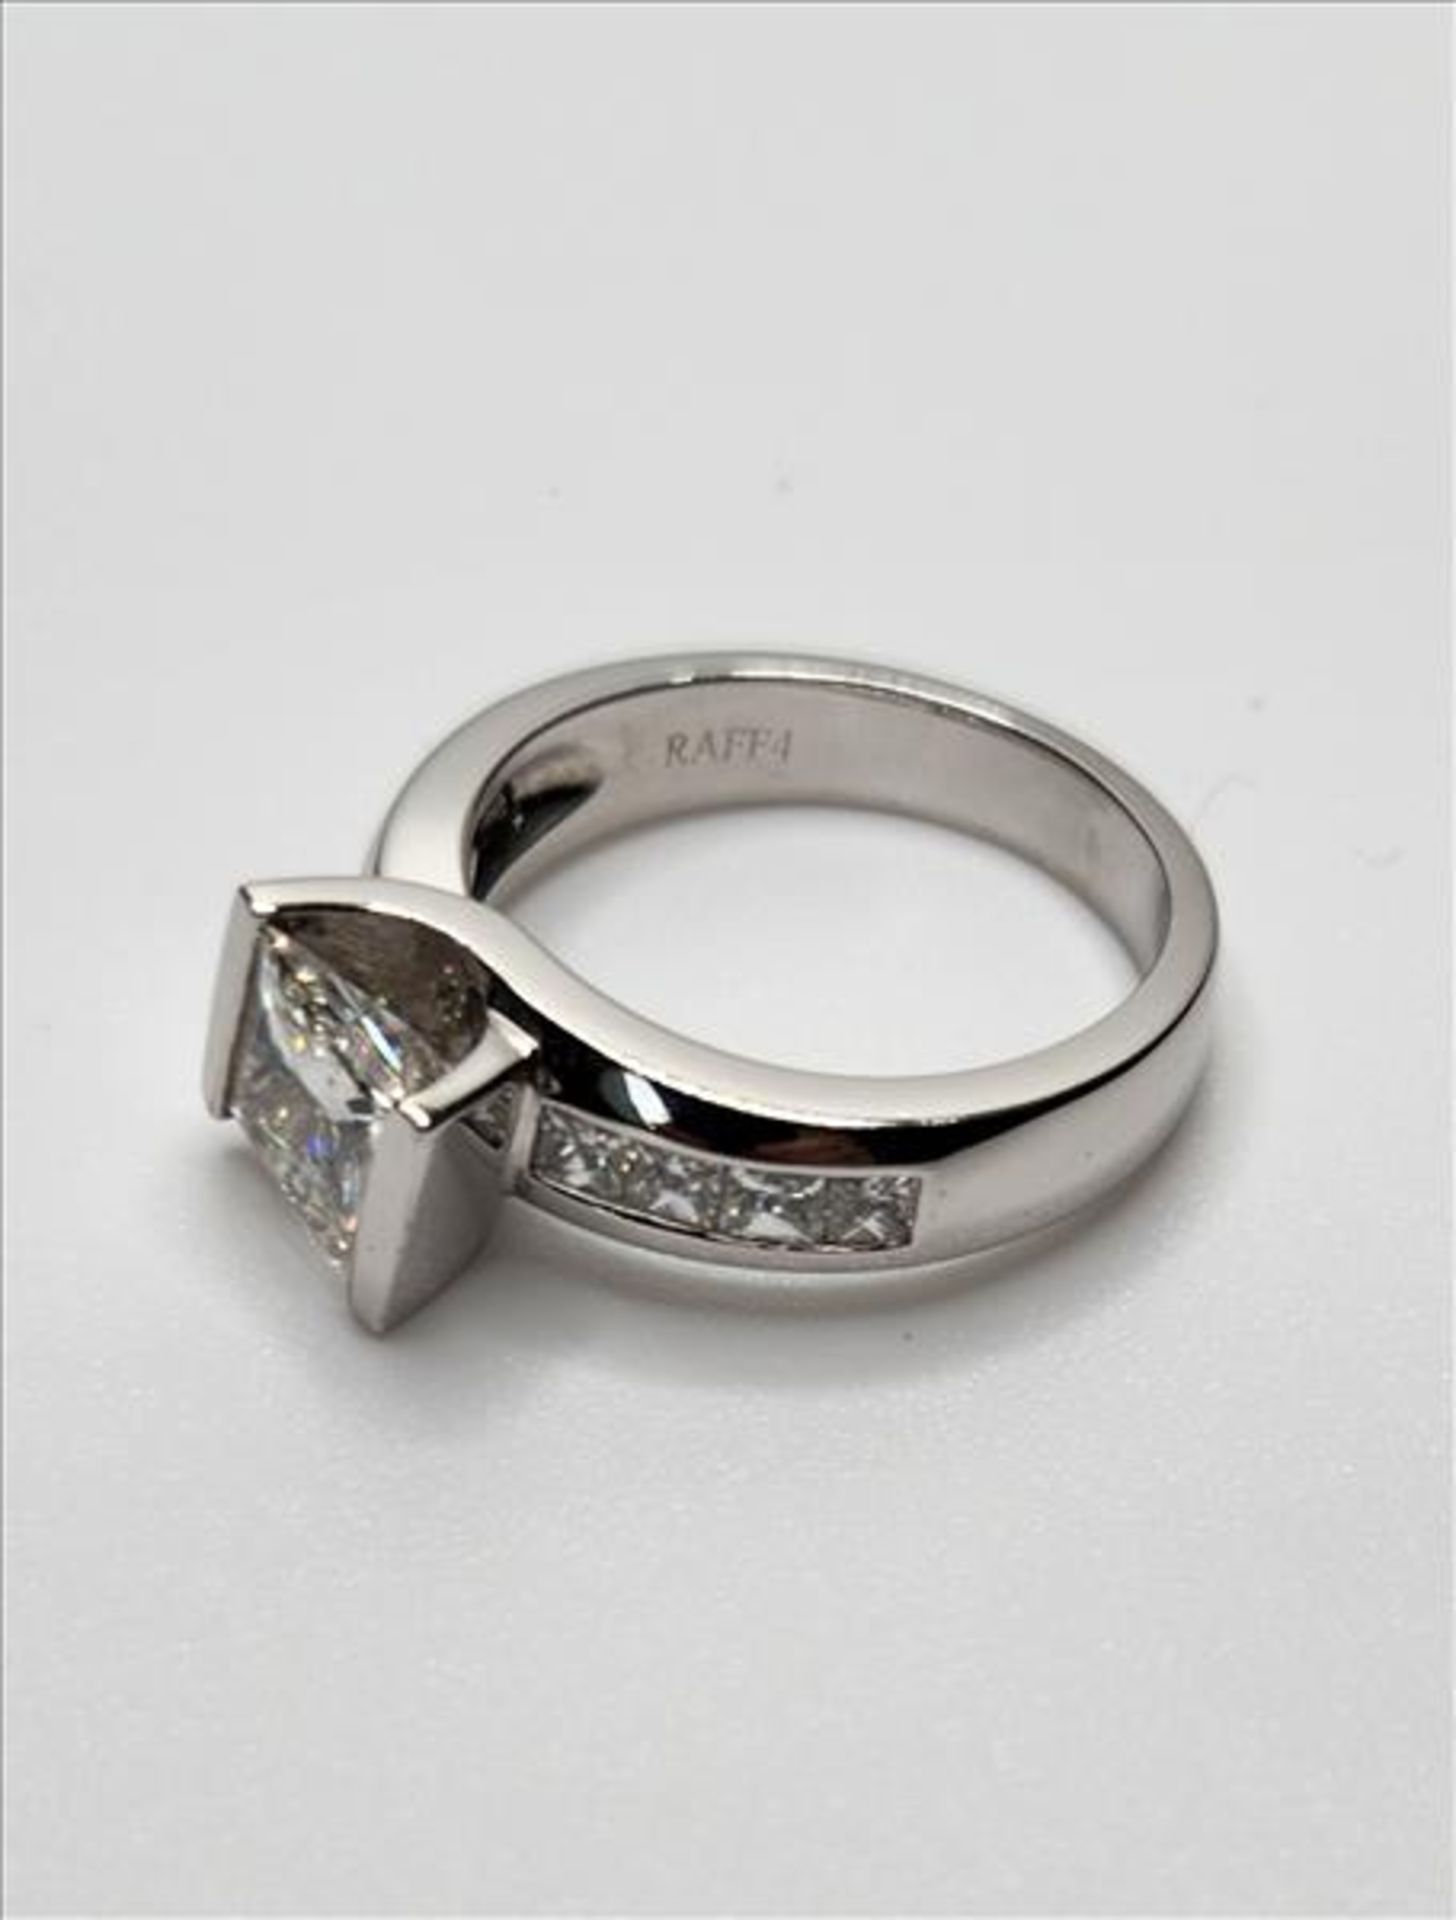 One lady’s stamped RAFP4 and tested 14kt white gold diamond ring by Michael Hill. Contained at the - Image 5 of 7